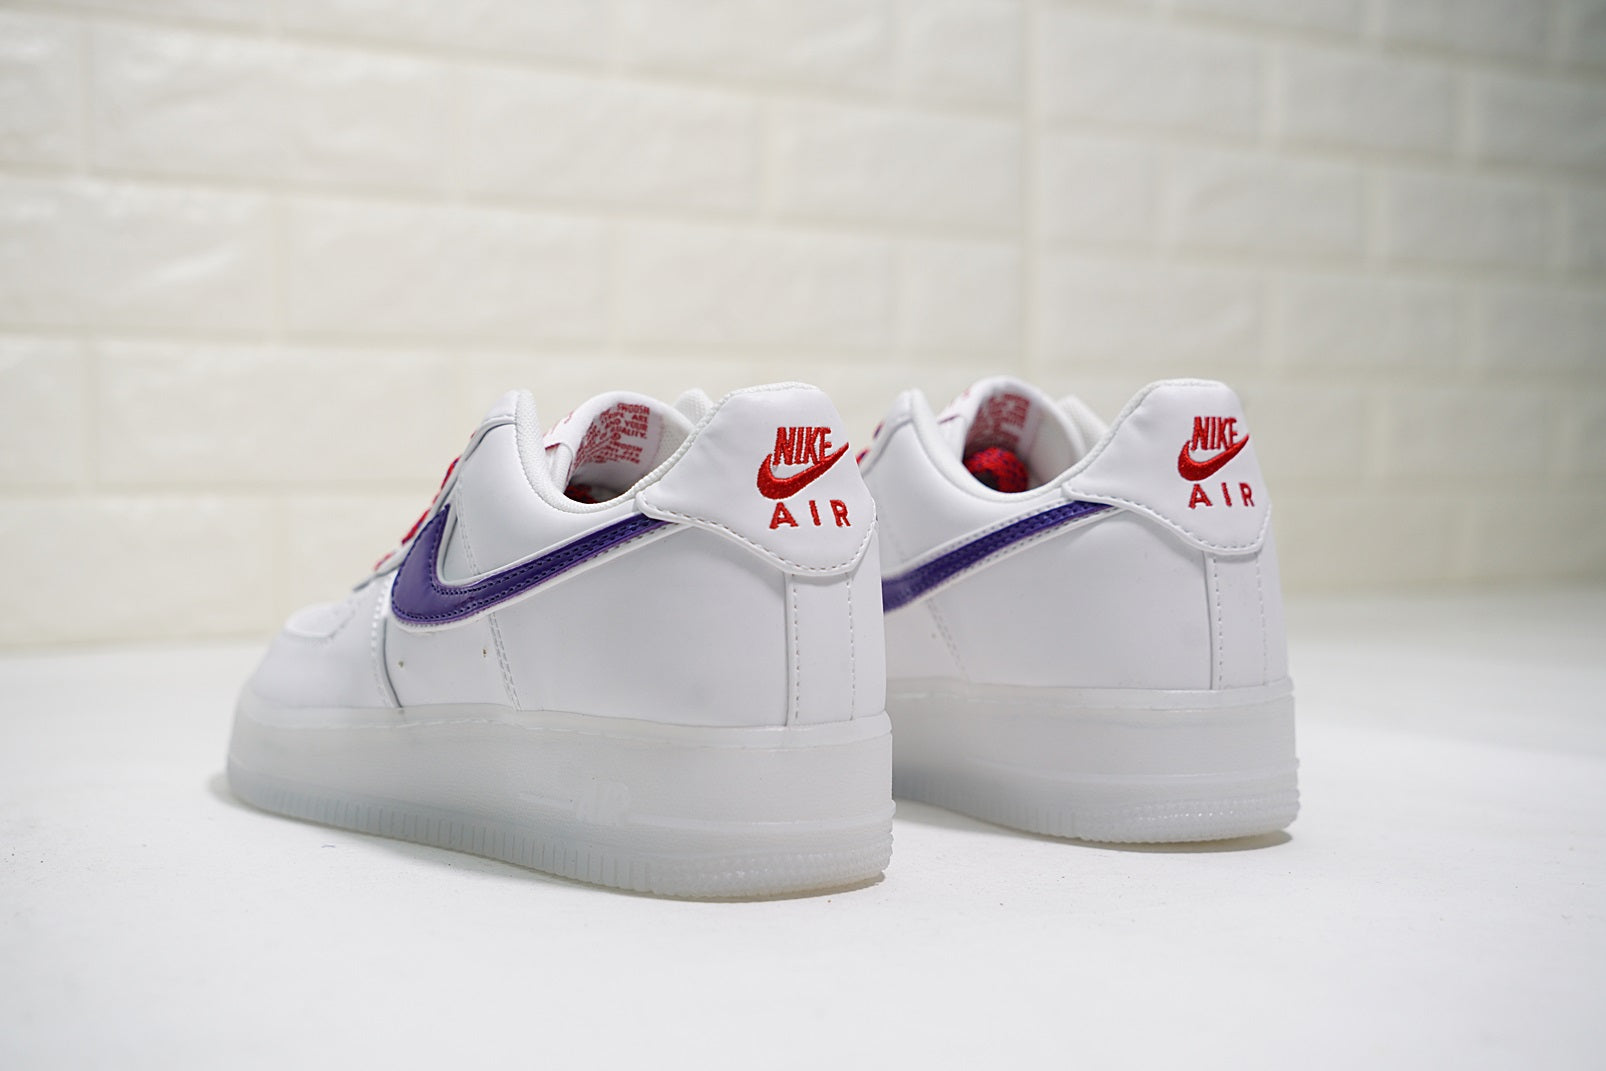 Air Force 1 Low “De Lo Mio” - whatever on 